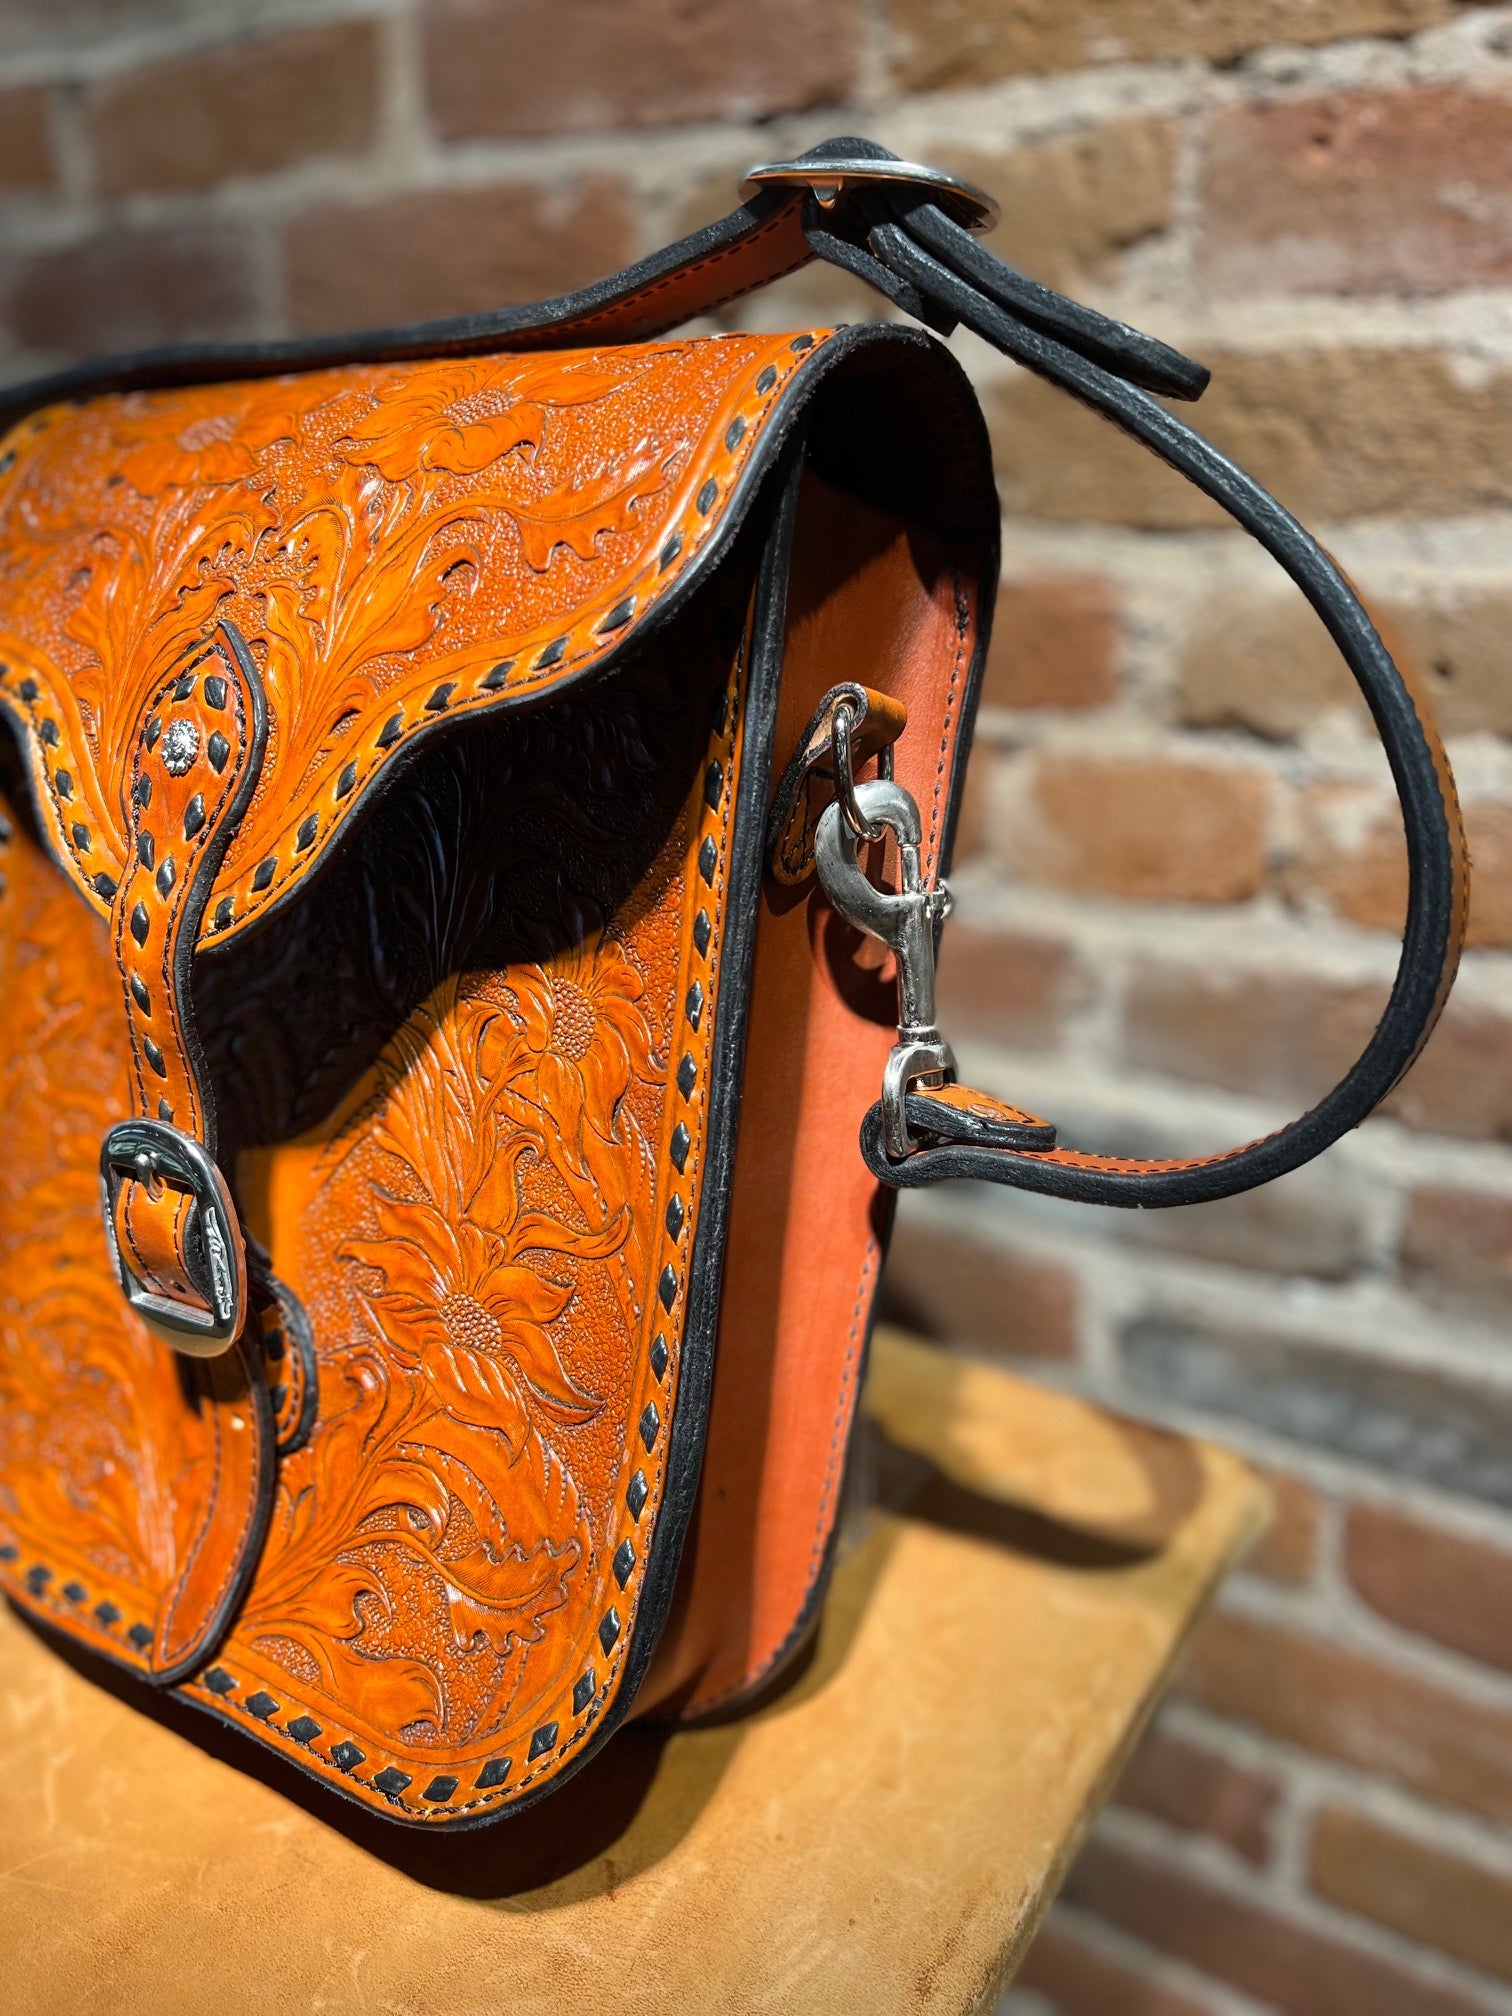 Handmade Leather Bags Everything you have to know – Ad Hoc Atelier